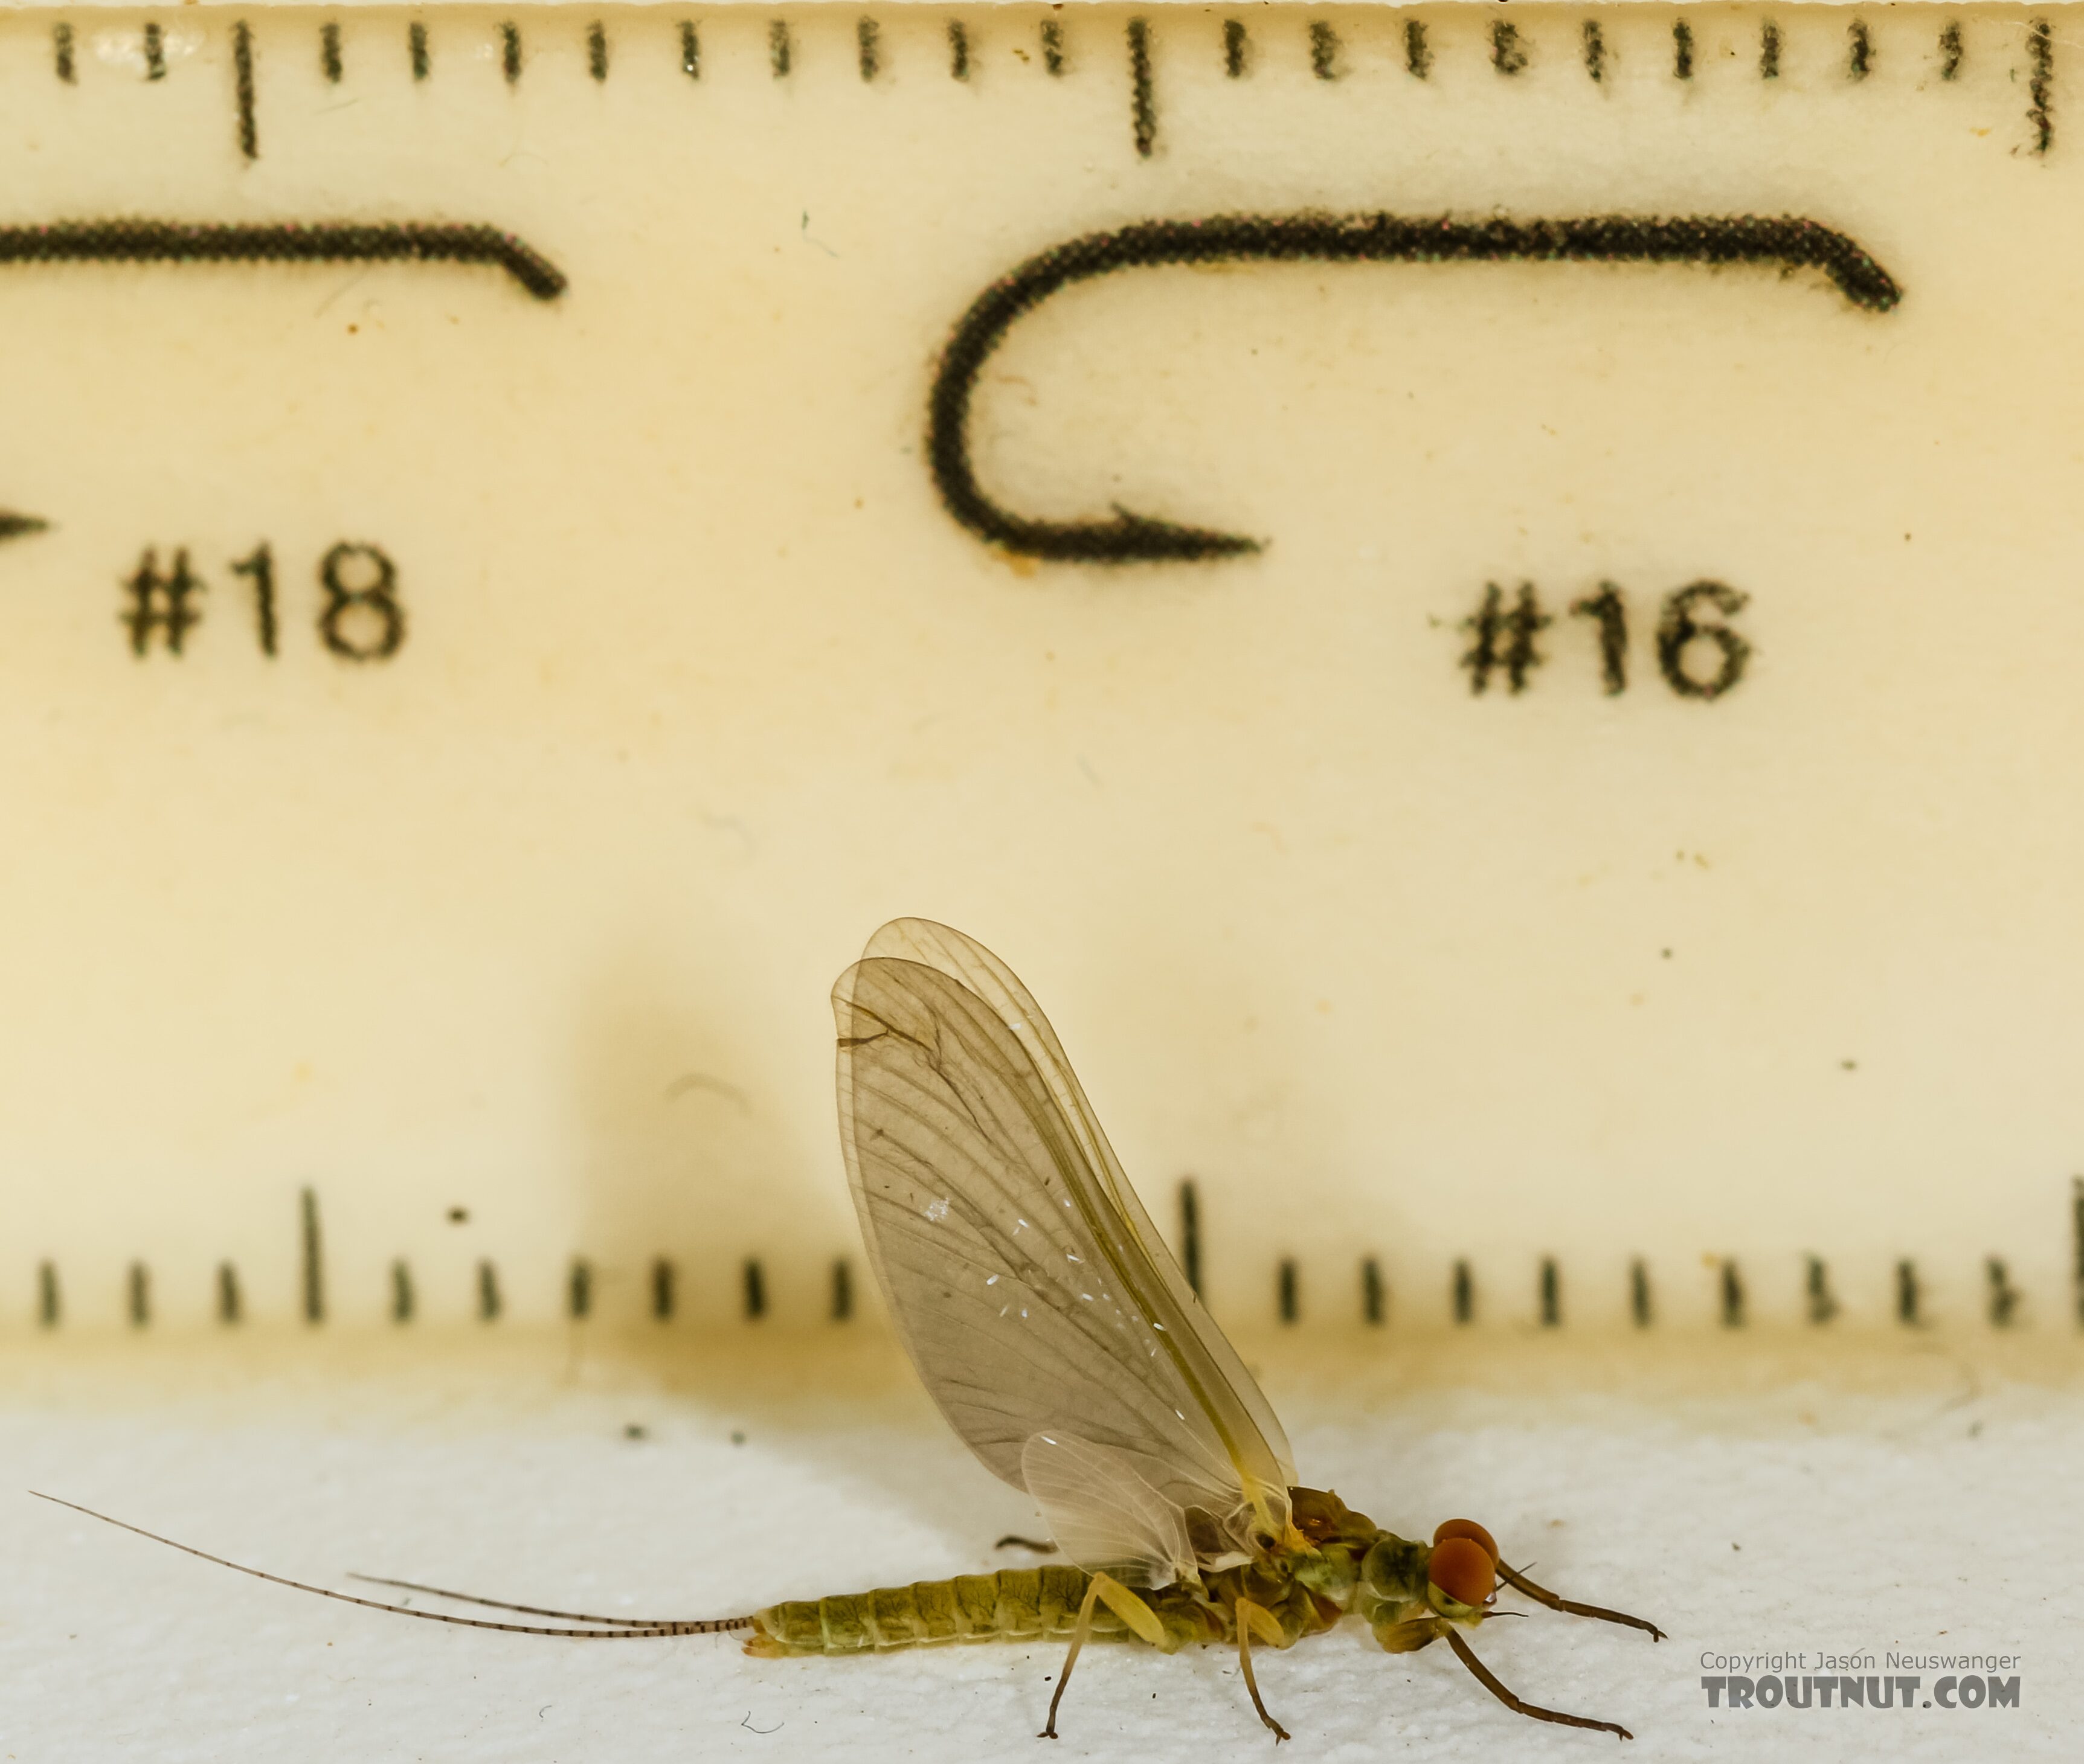 Male Ephemerella excrucians (Pale Morning Dun) Mayfly Dun from the Henry's Fork of the Snake River in Idaho